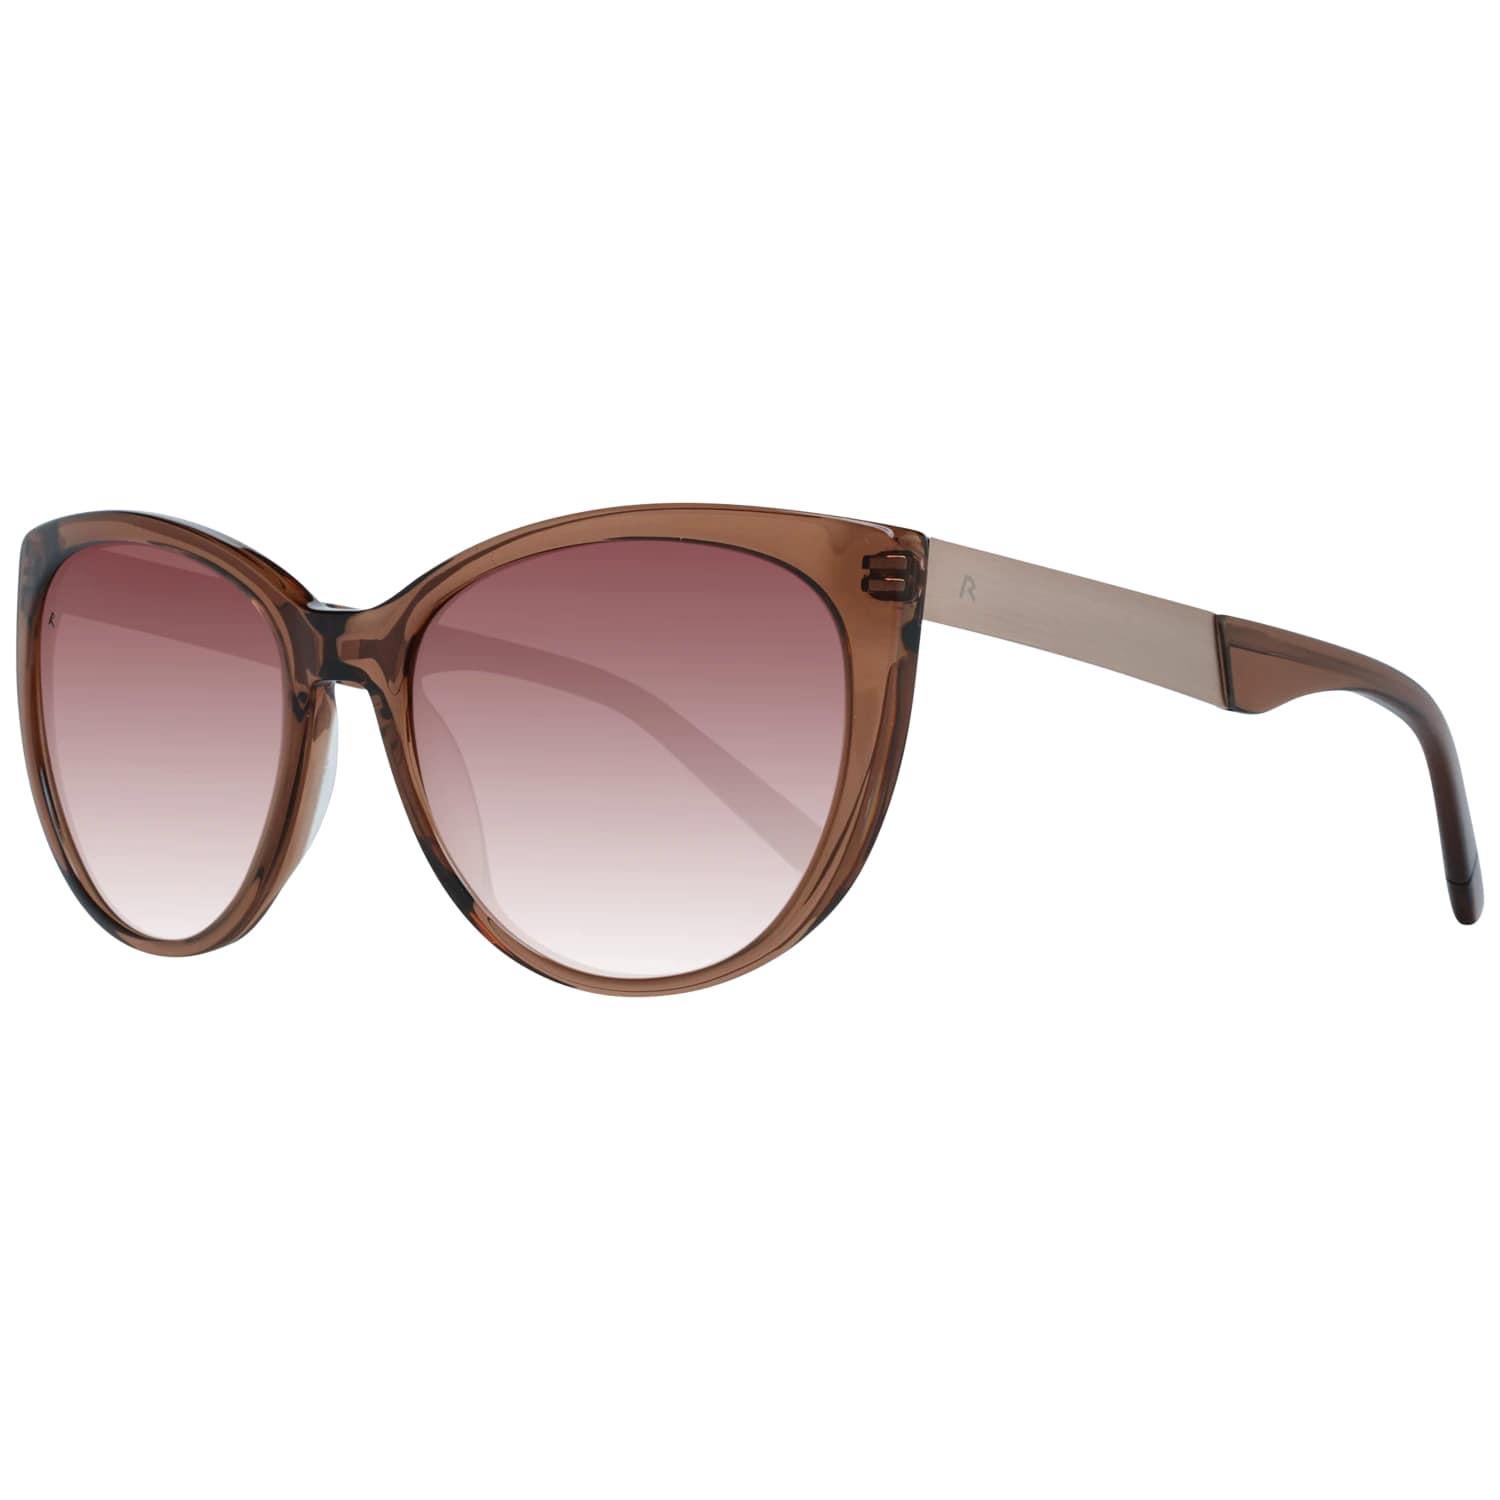 Details
MATERIAL: Acetate
COLOR: Brown
MODEL: R3300-C-5517-135-V625-E42
GENDER: Women
COUNTRY OF MANUFACTURE: China
TYPE: Sunglasses
ORIGINAL CASE?: Yes
STYLE: Oval
OCCASION: Casual
FEATURES: Lightweight
LENS COLOR: Brown
LENS TECHNOLOGY: